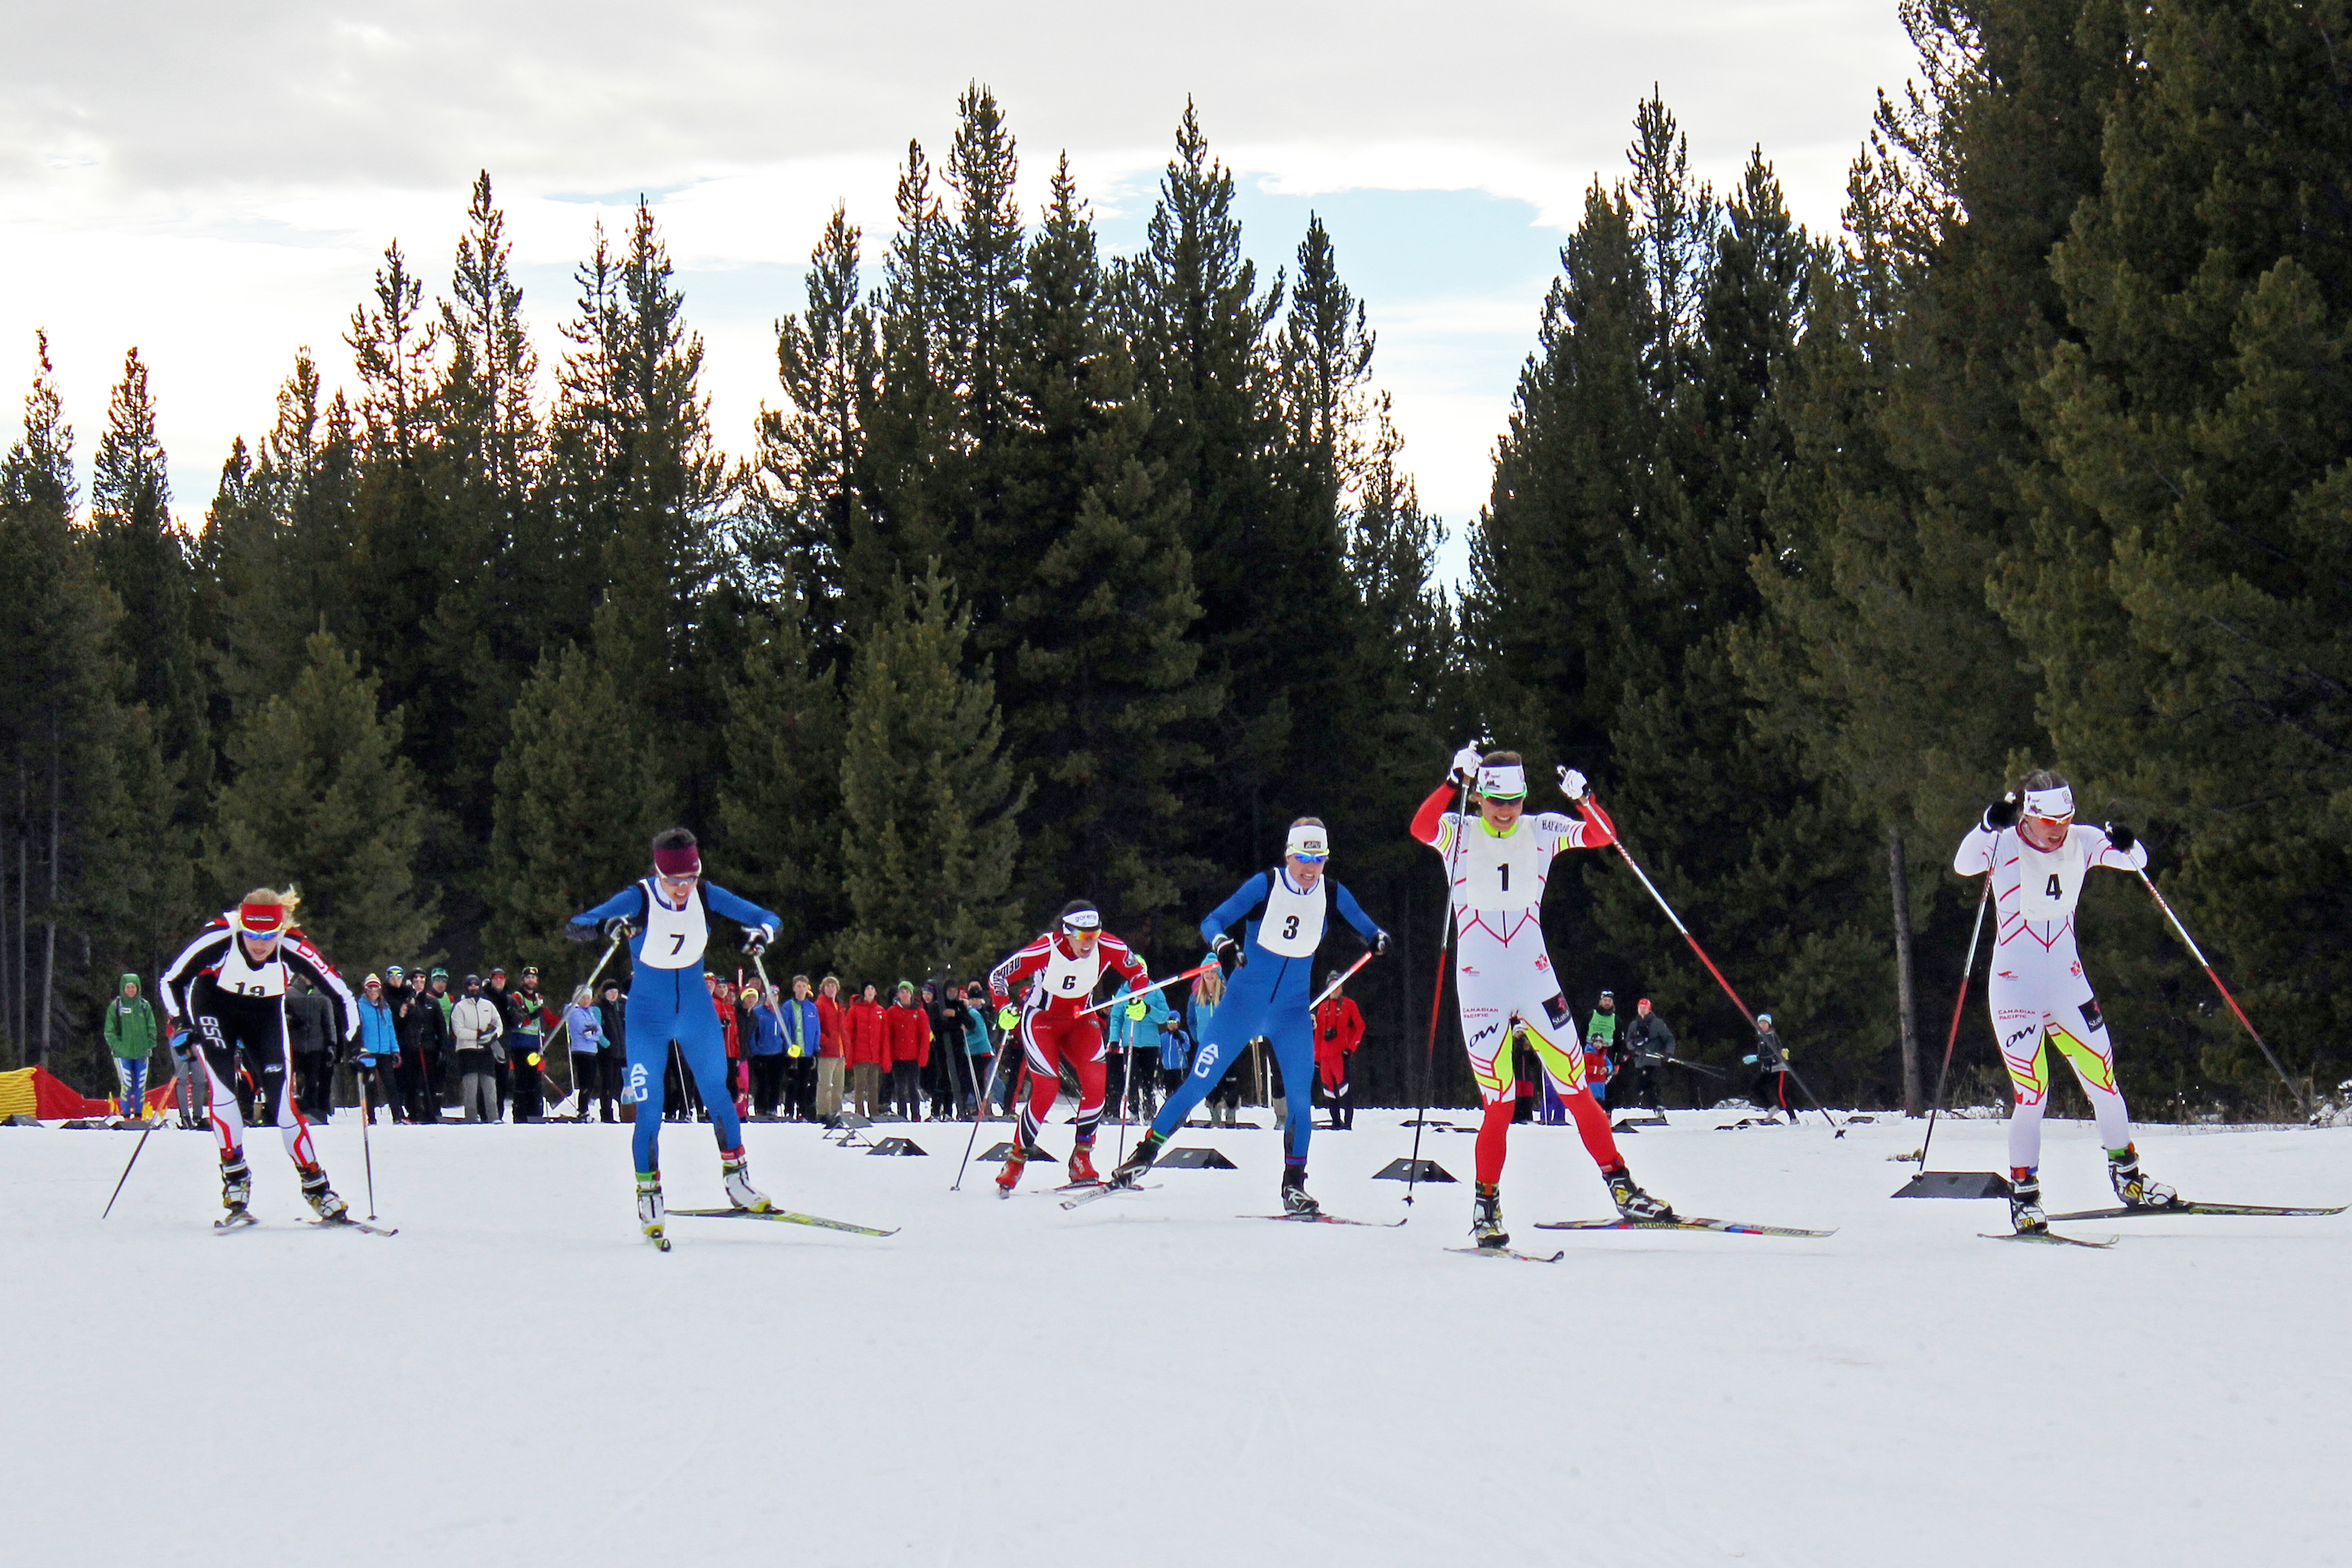 Alyson Marshall (AWCA/NST) in bid four and Heidi Widmer (AWCA/NST) in bib one lead (from l-r) Rosie Brennan (APU), Eva Severrus (UNM), Chelsea Holmes (APU) and Jennie Bender (BSF) in the women's A-final of the 2014 West Yellowstone SuperTour freestyle sprint. Marshall won the event with Widmer and Bender finishing second and third.  